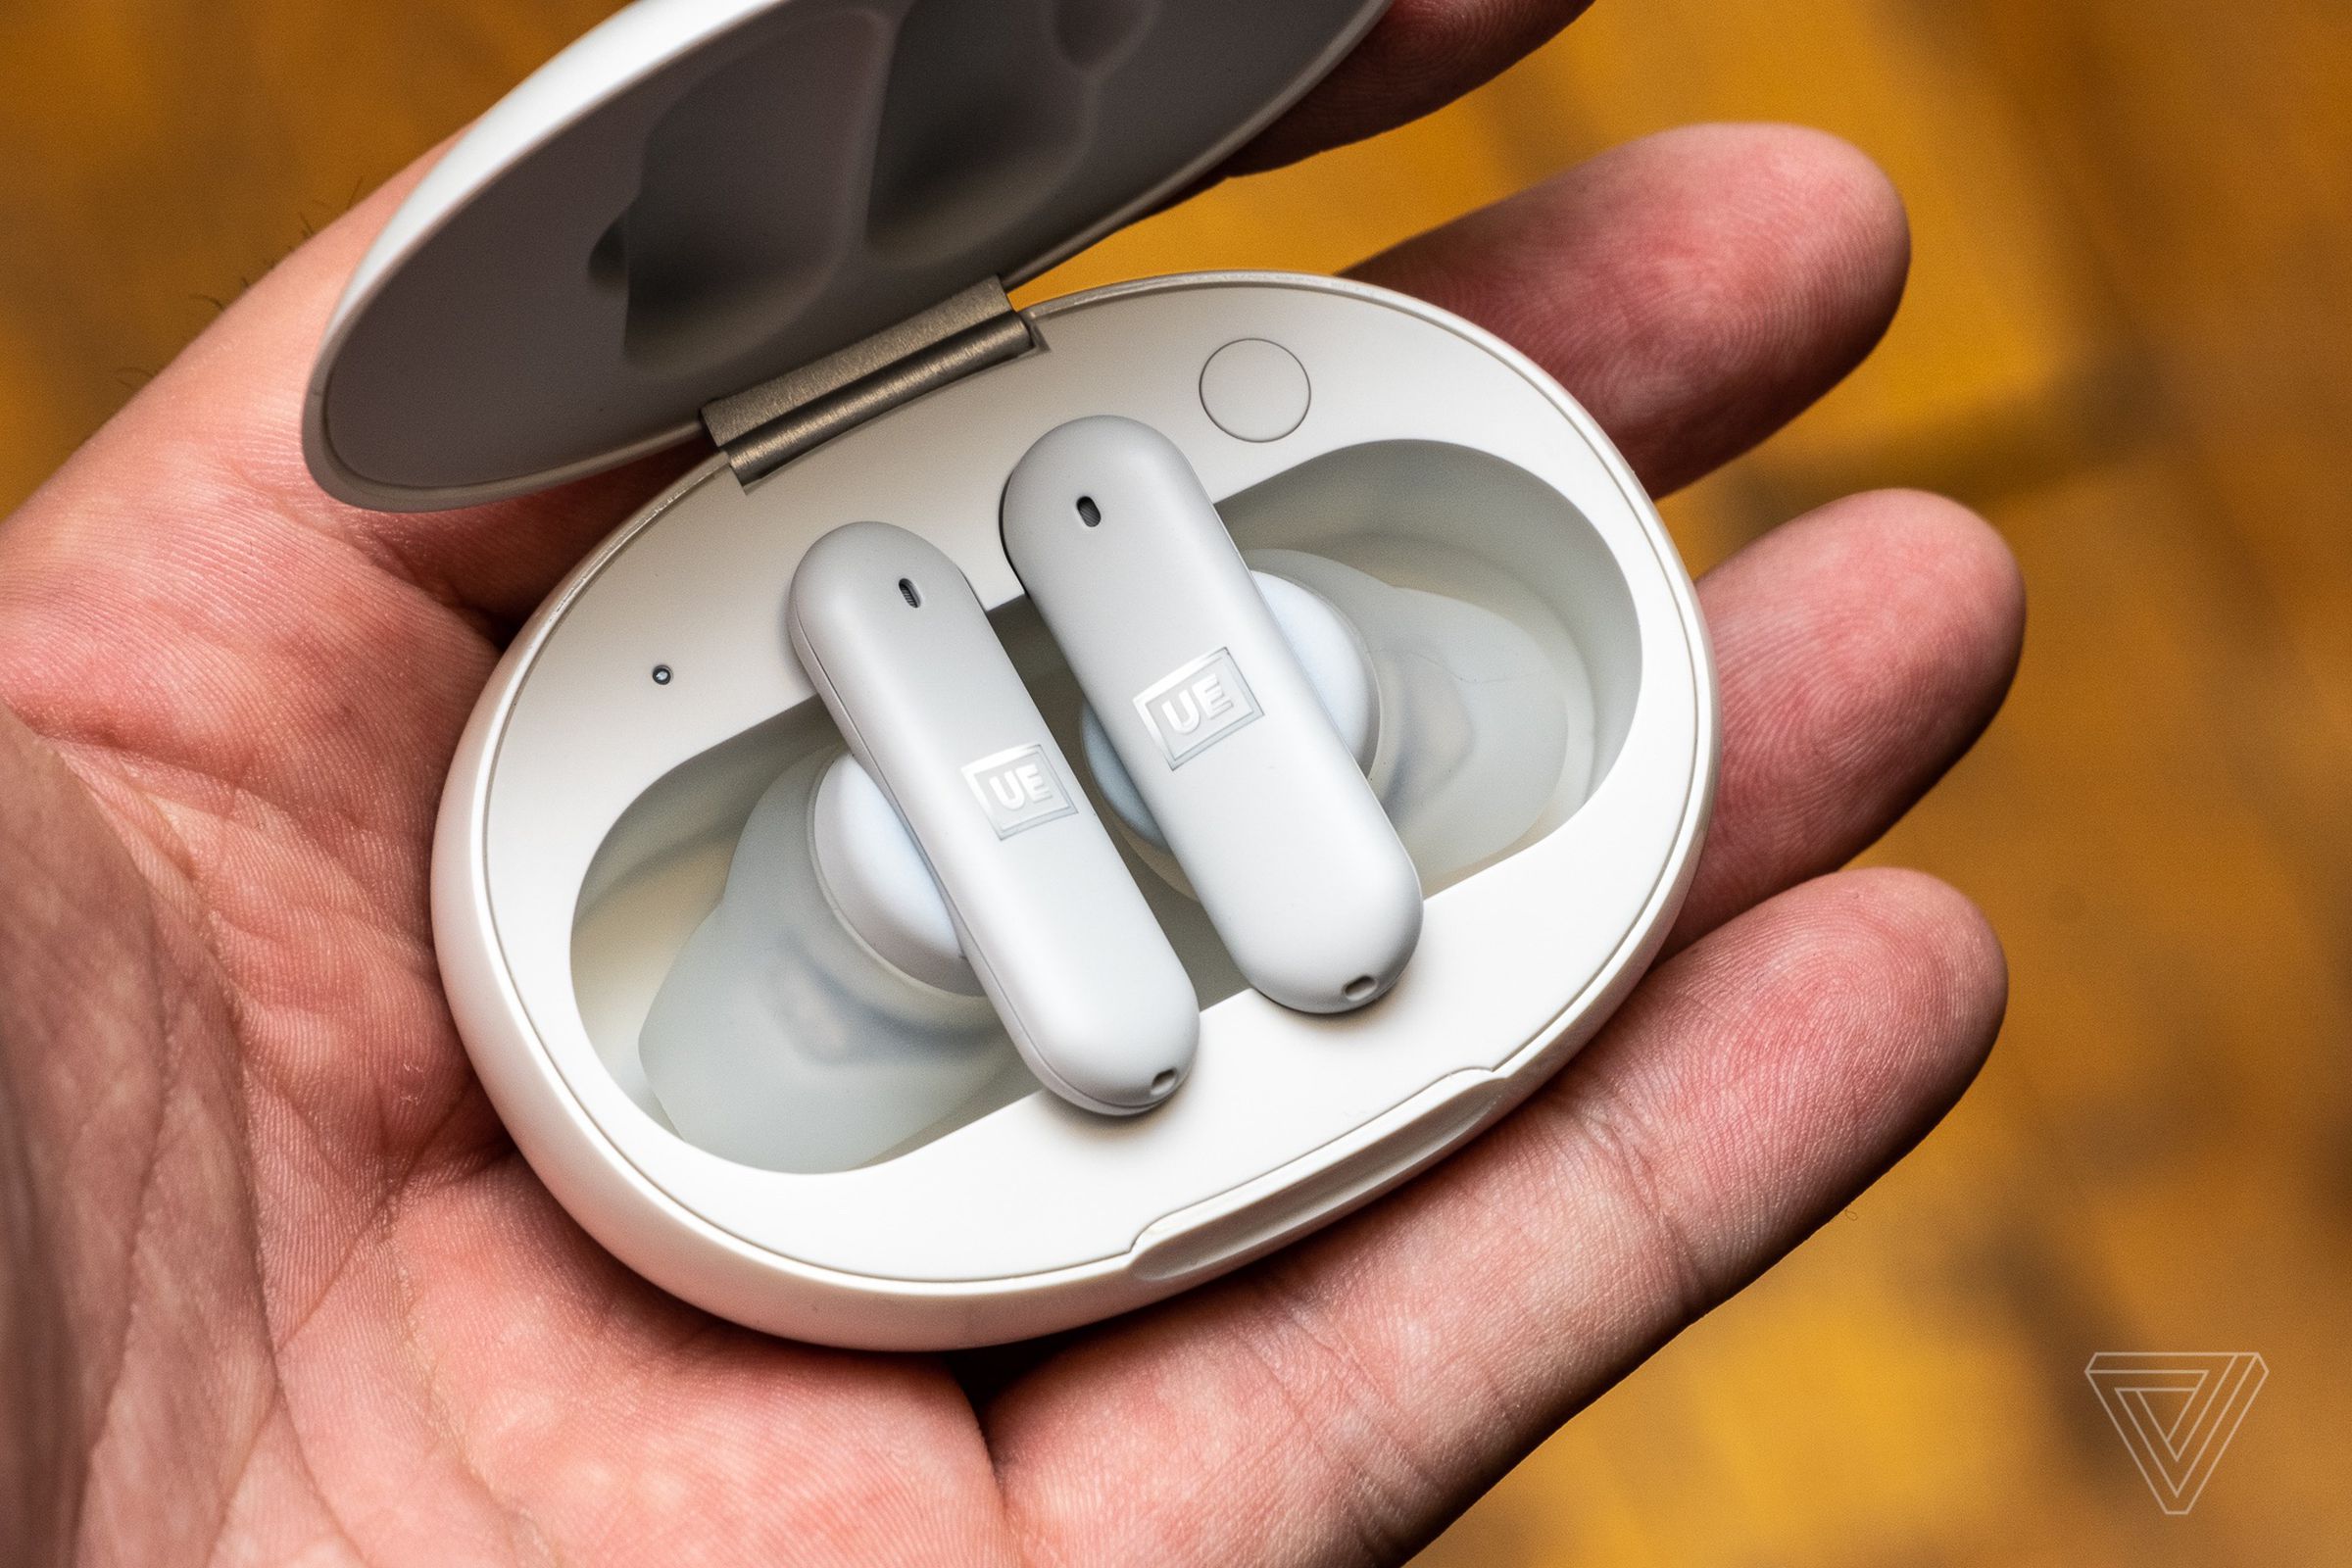 The UE Fits custom-mold to your ears, though their case sadly lacks wireless charging.